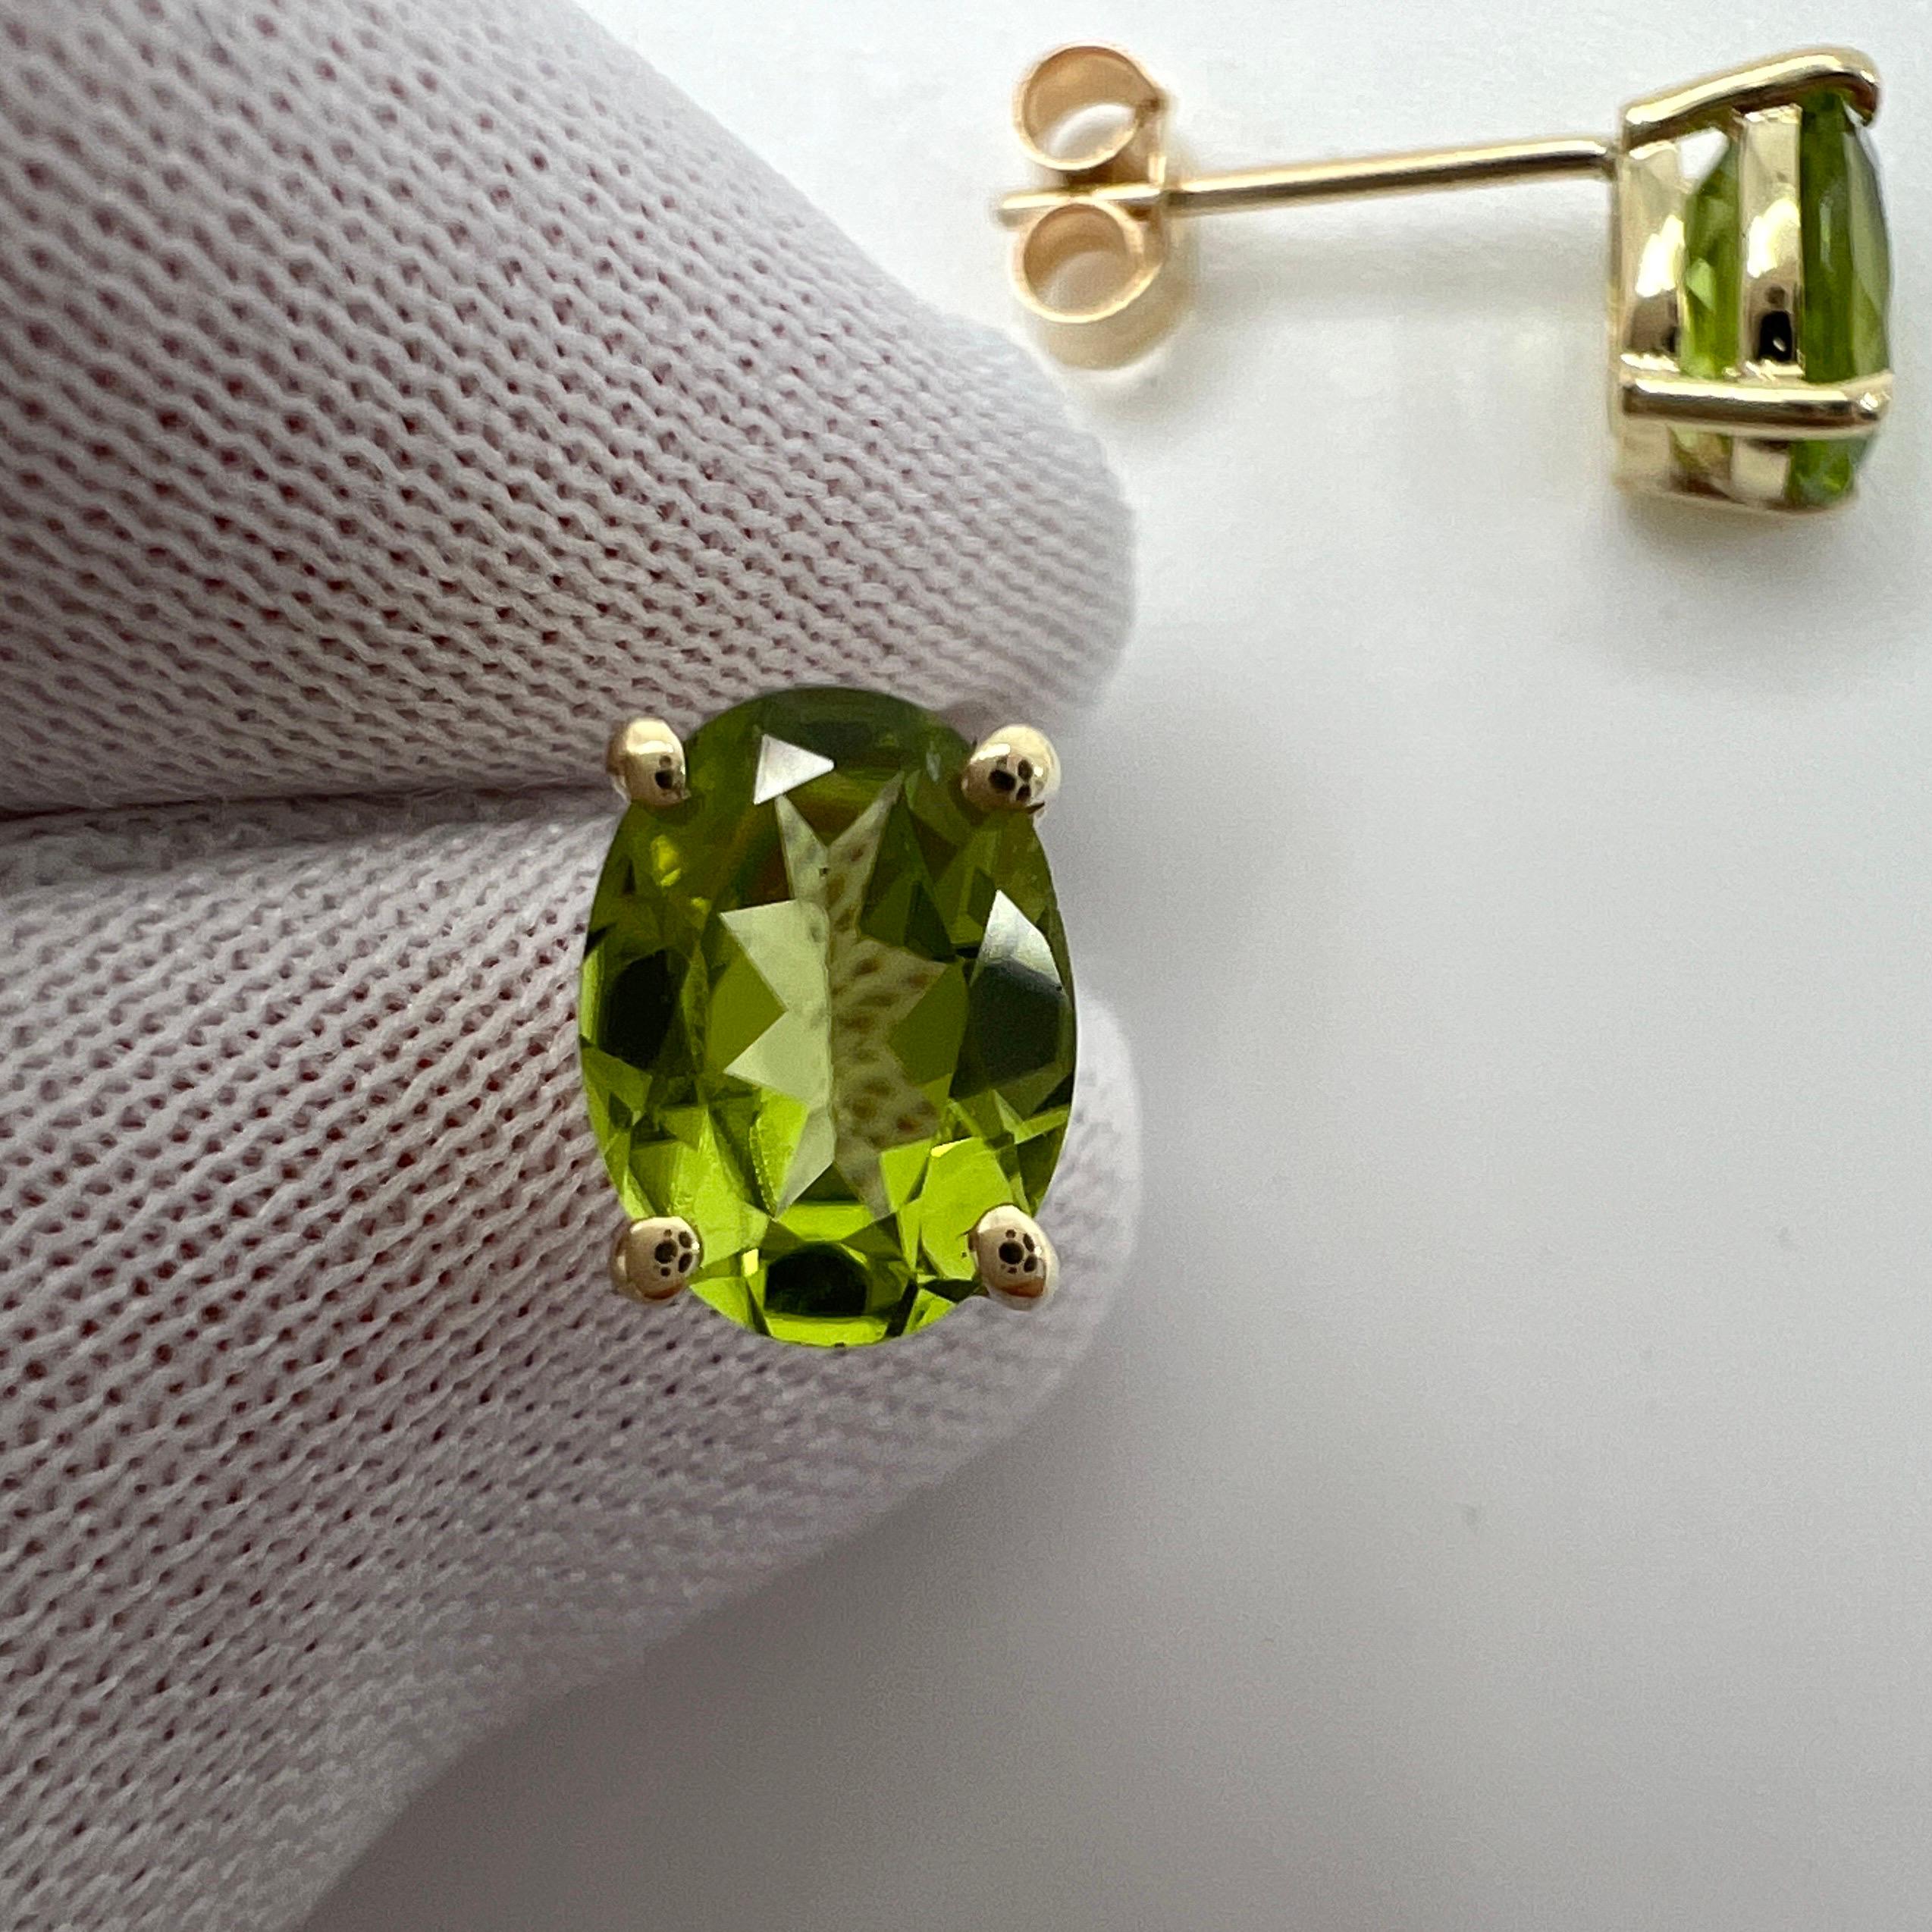 Natural Vivid Green Peridot Yellow Gold 9K Oval Cut Earring Studs 8x6mm.

Natural Vivid Green 2.50 Carat Peridot Yellow Gold Earring Studs. 

Beautiful 8x6mm matching pair of oval cut peridot with vivid green colour, excellent clarity and an